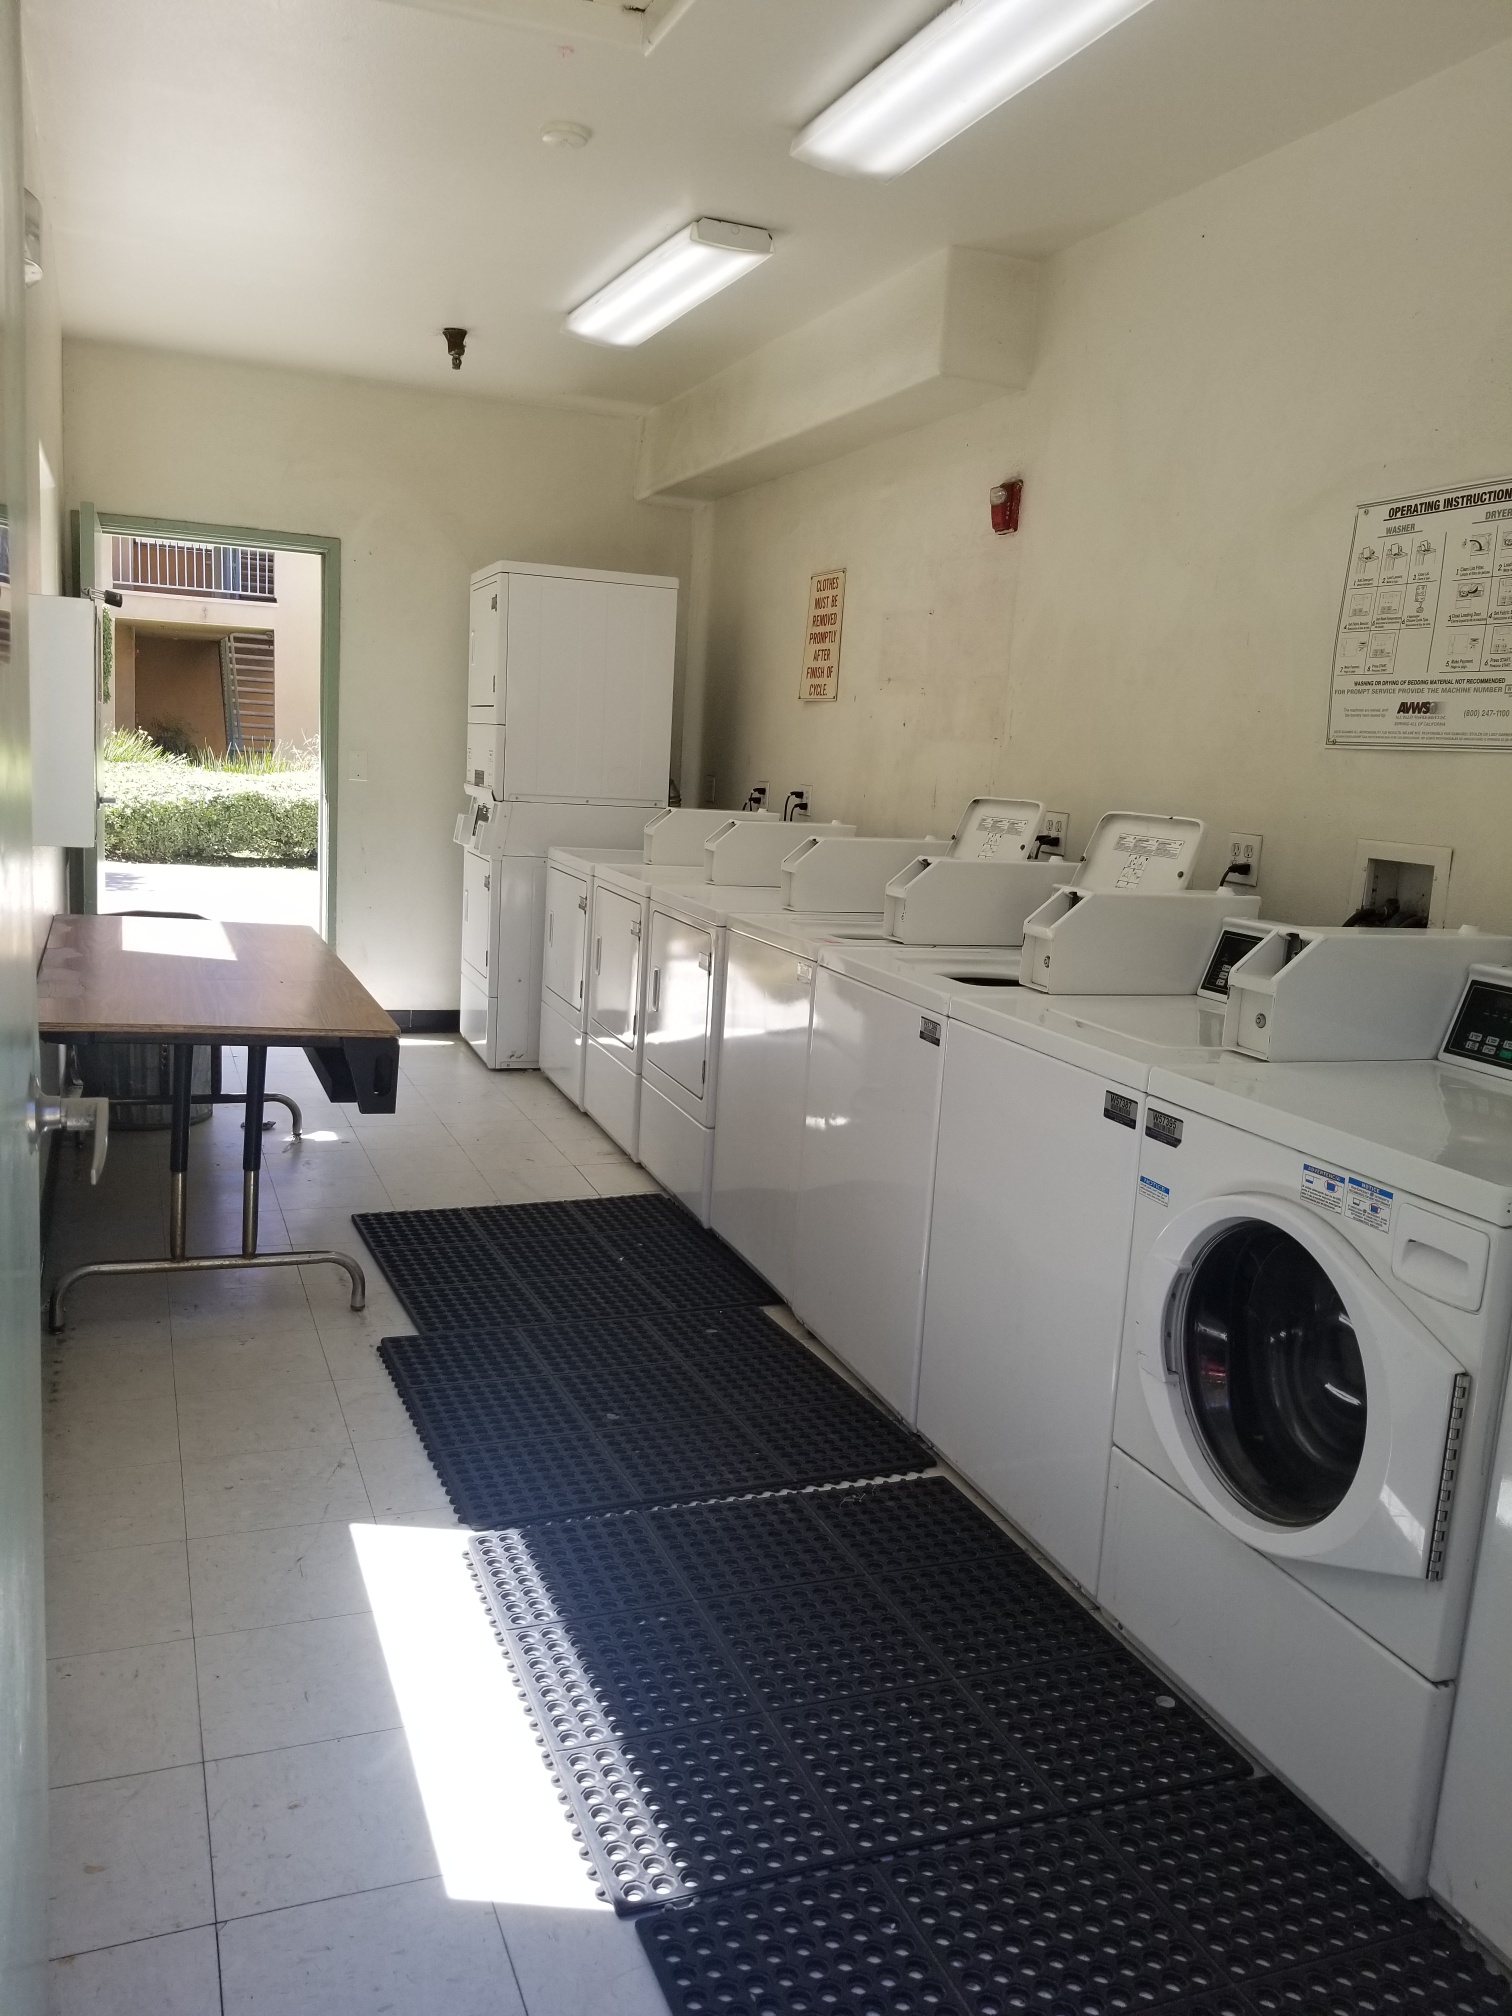 Willow Tree Village community laundry room. Side by side washer and dryers. Anti-slip mats. Long table located near entrance of room